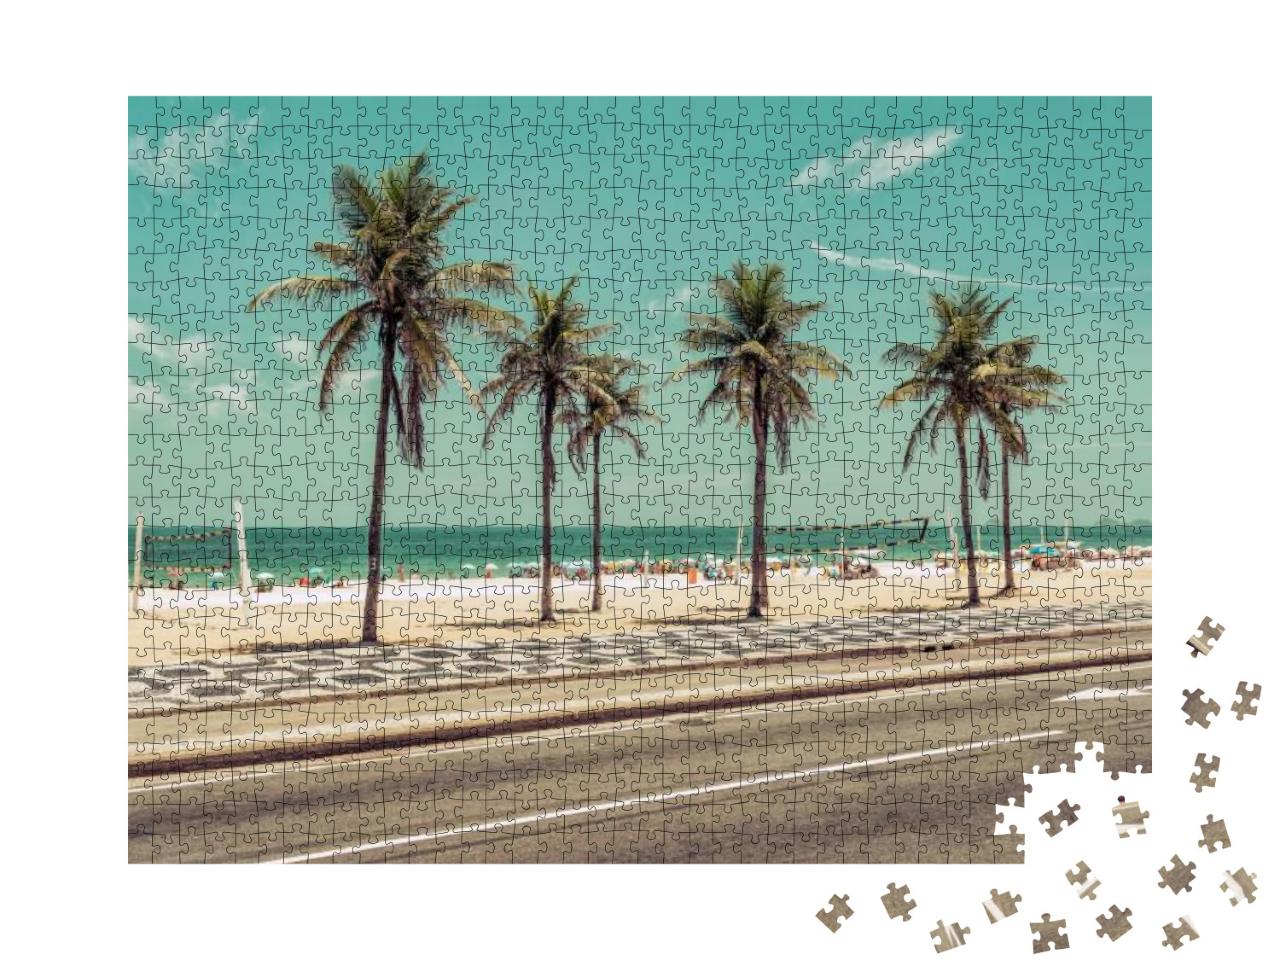 Sunny Day with Palms on Ipanema Beach in Rio De Janeiro... Jigsaw Puzzle with 1000 pieces